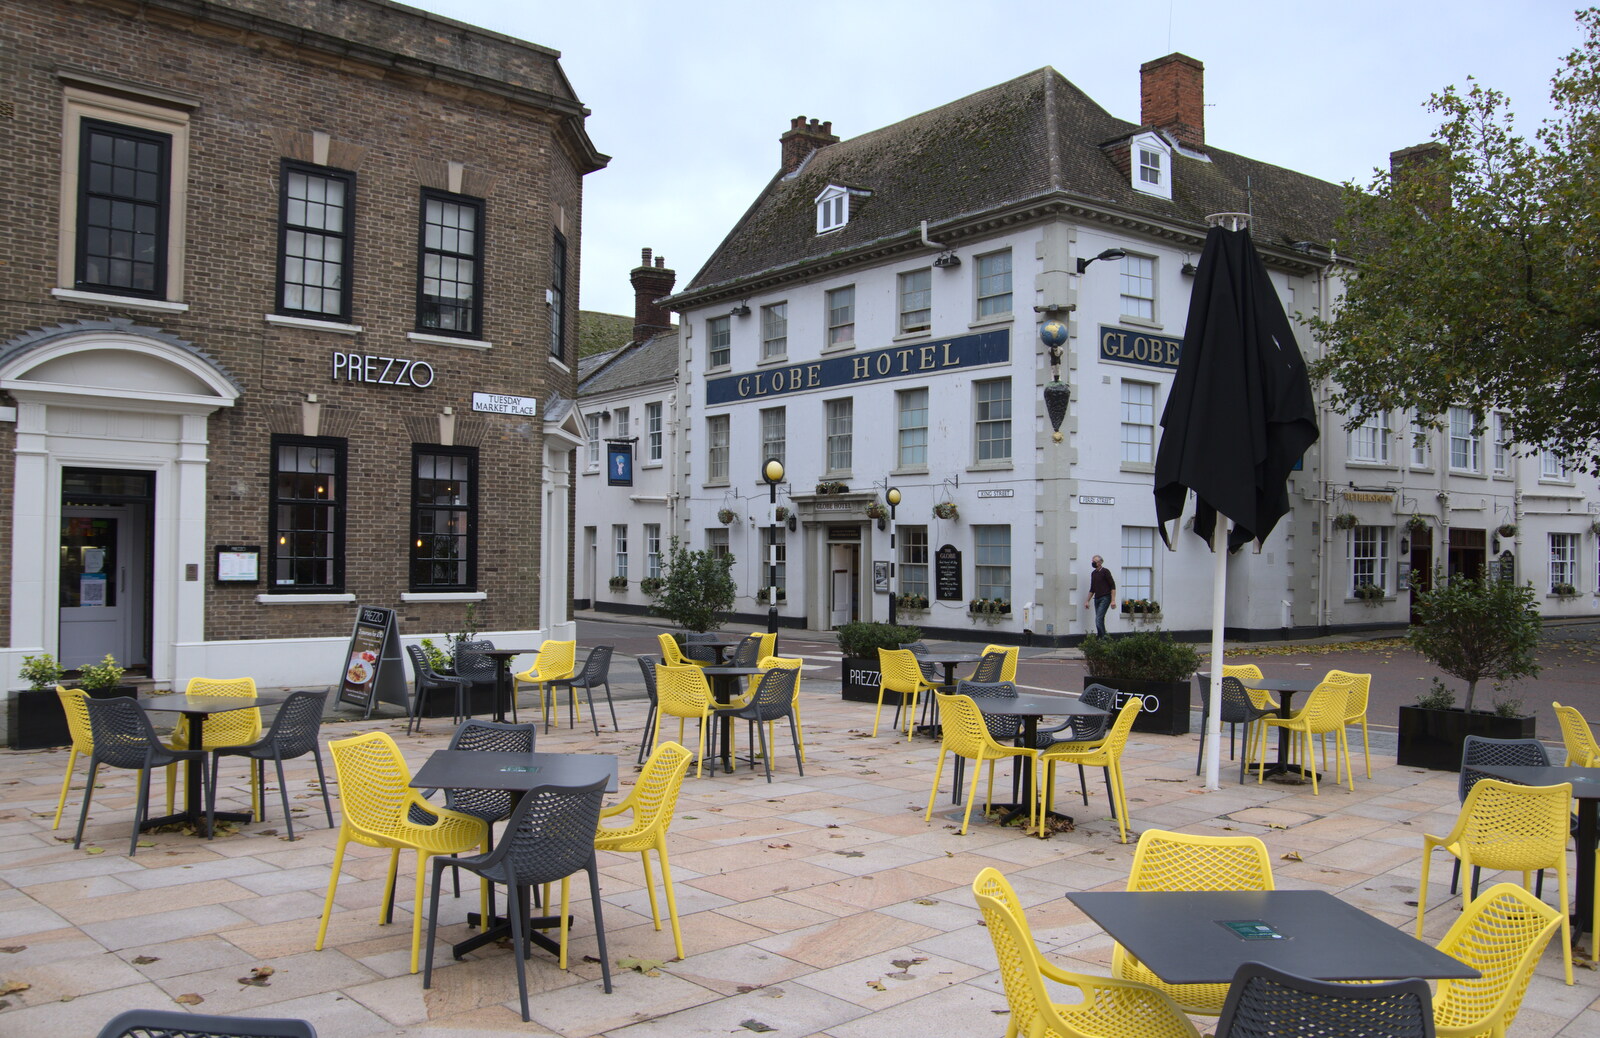 Optimistic outdoor tables at Prezzo from A Postcard From Kings Lynn and "Sunny Hunny" Hunstanton, Norfolk - 31st October 2020